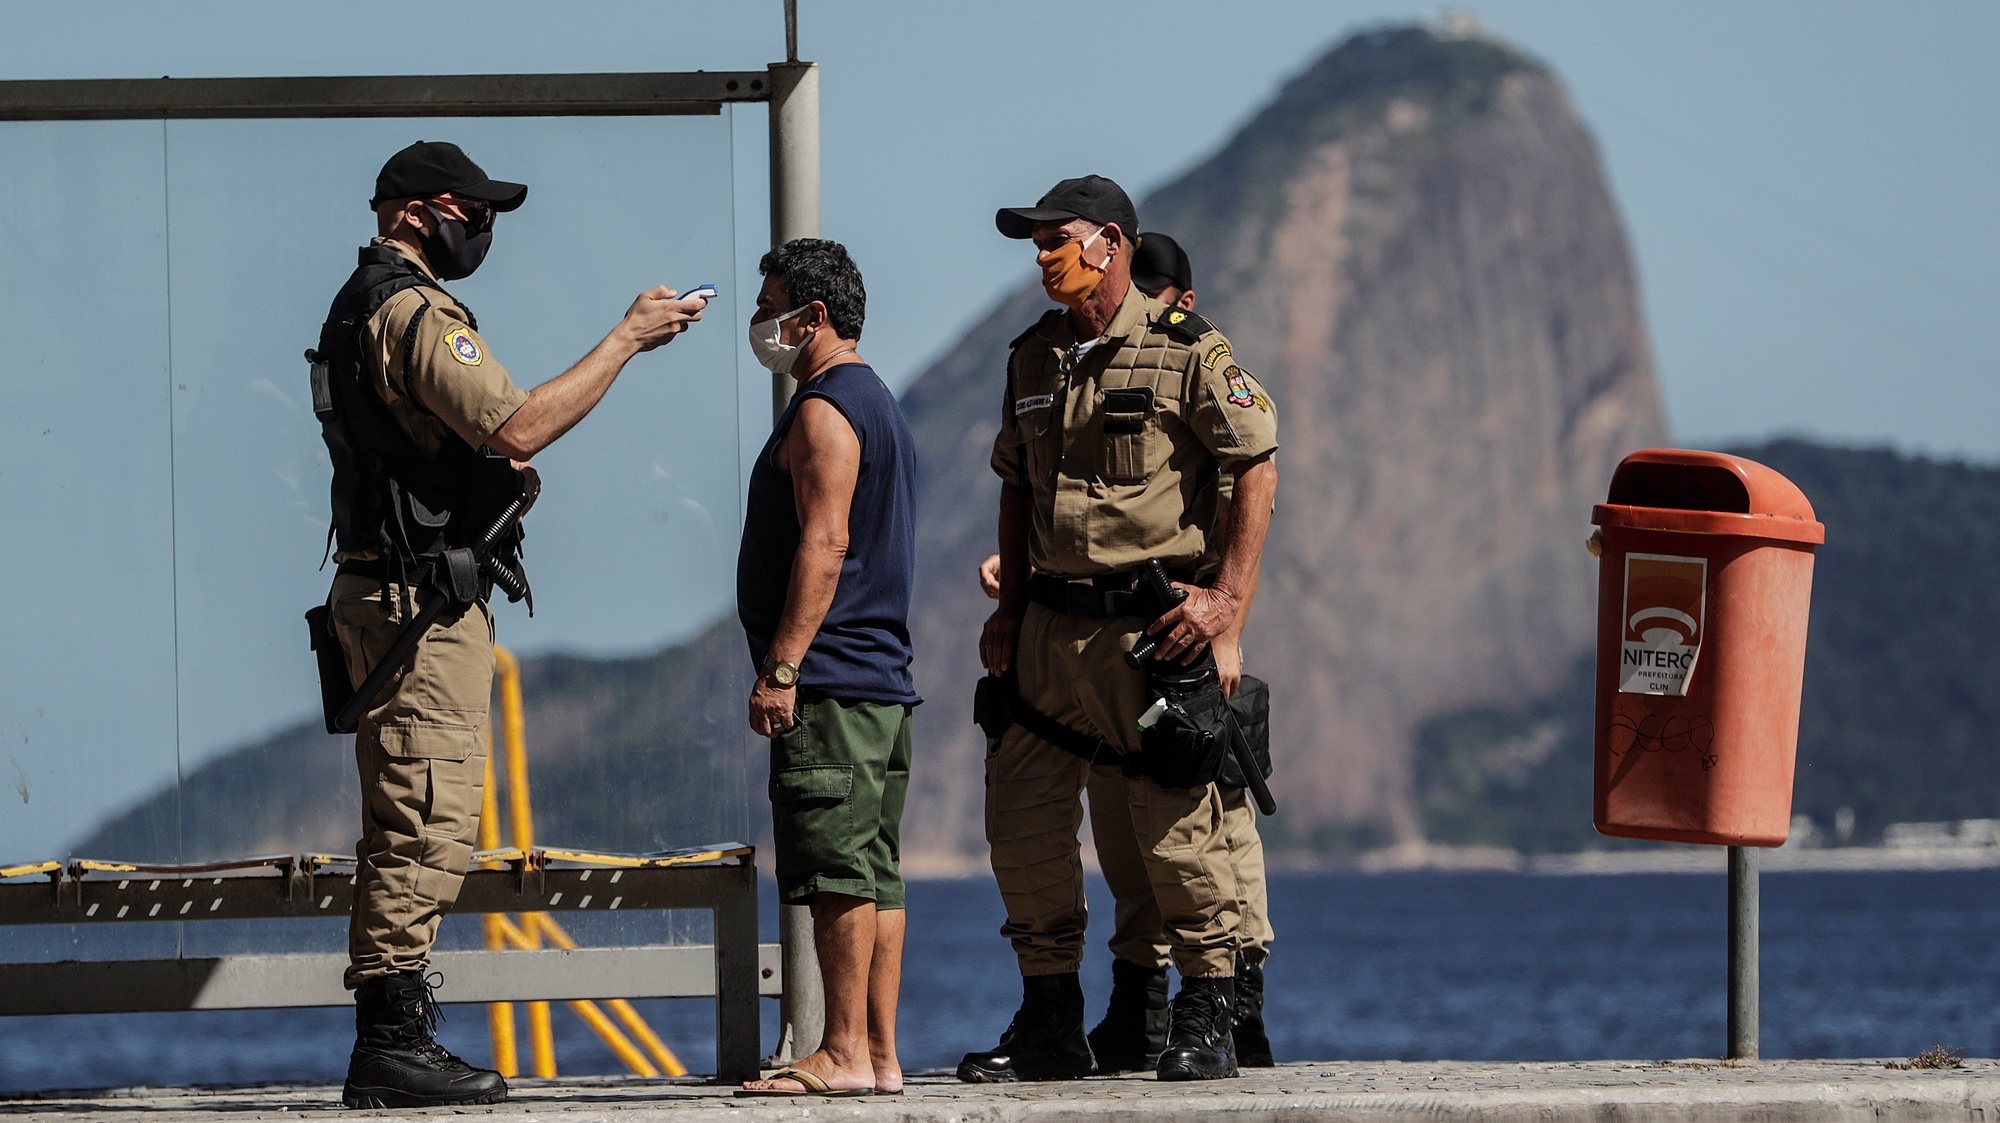 epa08415591 A security officer from the Niterioi city council takes a man&#039;s temperature in Niteroi, Rio de Janeiro, Brazil, 11 May 2020. Cities of Niteroi and Sao GonÃ§alo became the first municipalities in the state of Rio de Janeiro to intensify the restrictive measures of traffic and circulation of people by decreeing the so-called &#039;lockdown&#039;, which will be applied for an initial period of five days. With these two municipalities in the metropolitan region of Rio de Janeiro, there are already twenty Brazilian cities adopting a total blockade to prevent the spread of the pandemic.  EPA/Antonio Lacerda